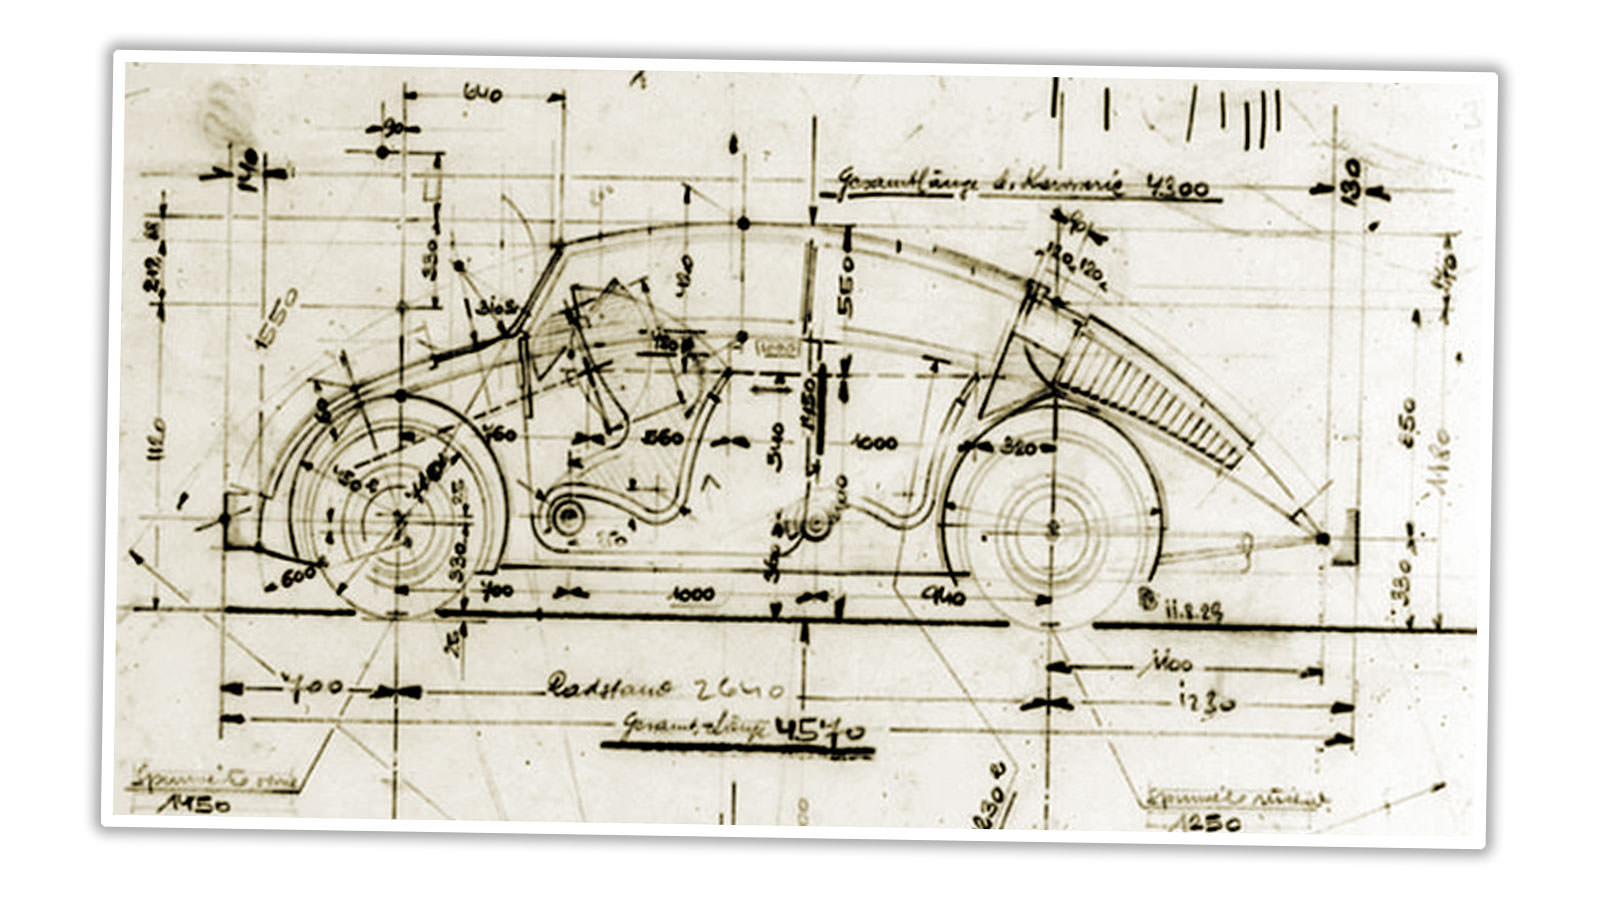 Technical drawing of Bela Barenyi’s car design, which is very similar to VW Beetle’s design.